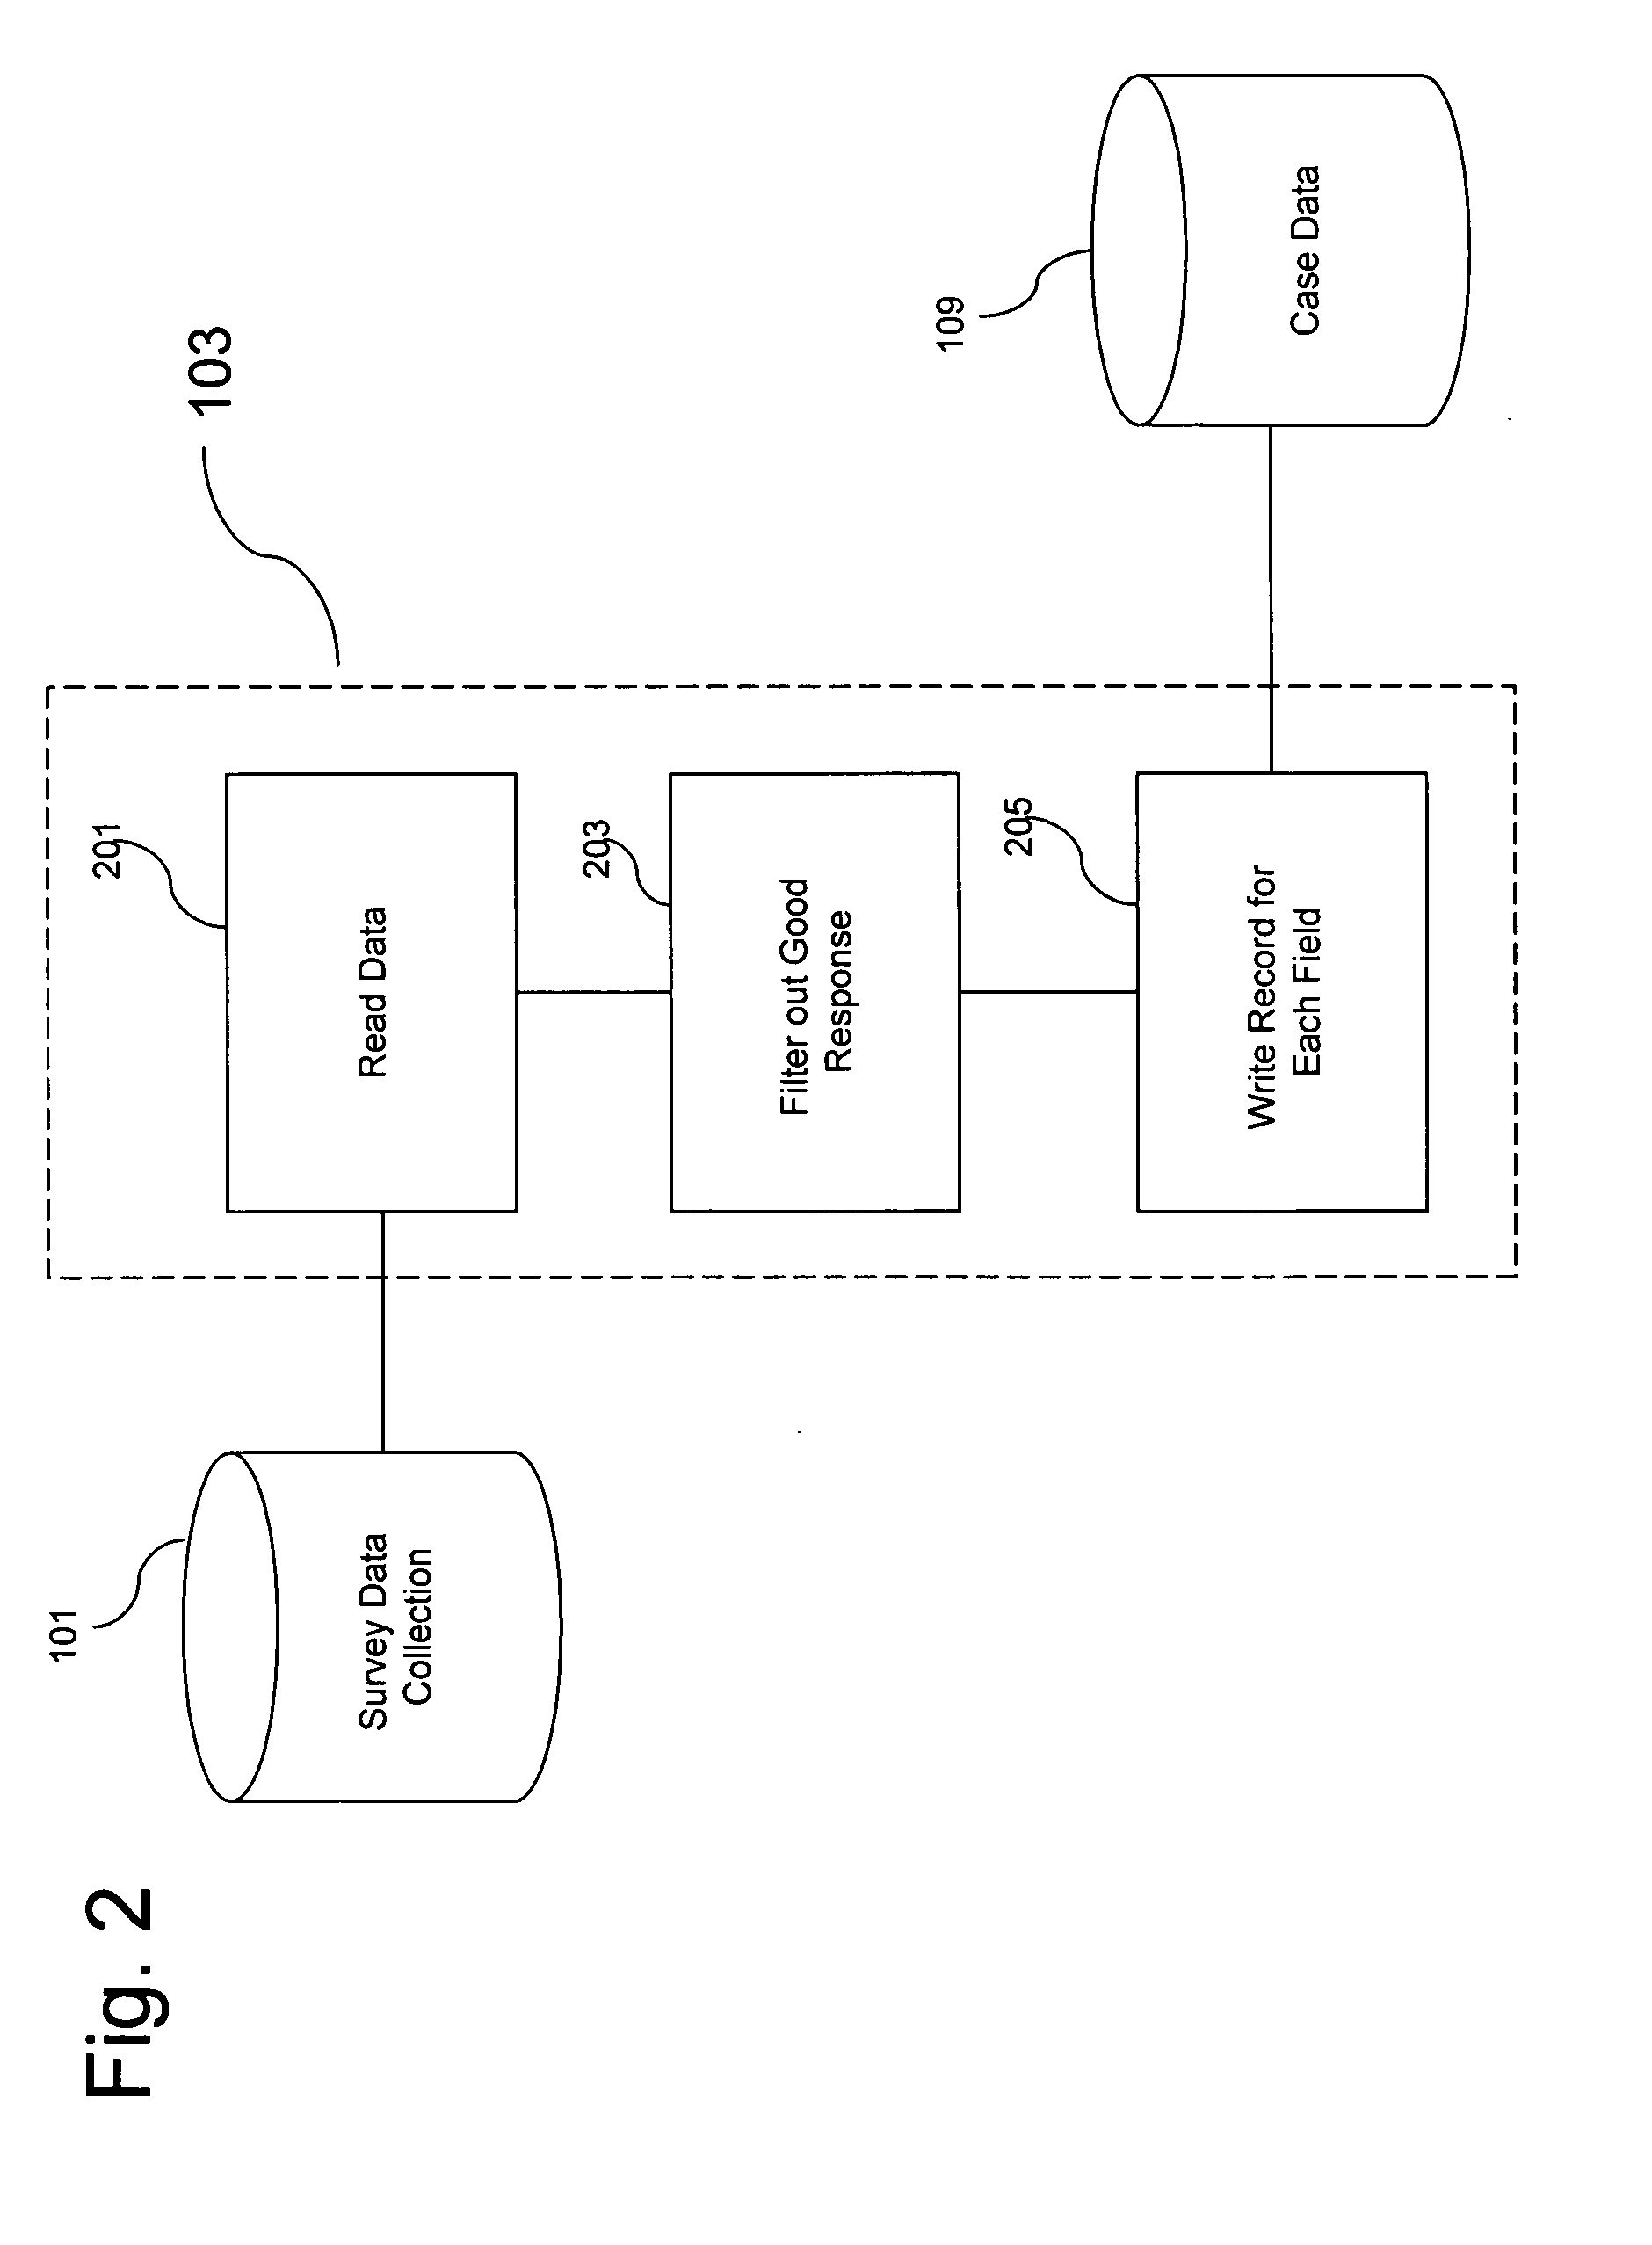 System and method for correlating market research data based on attitude information